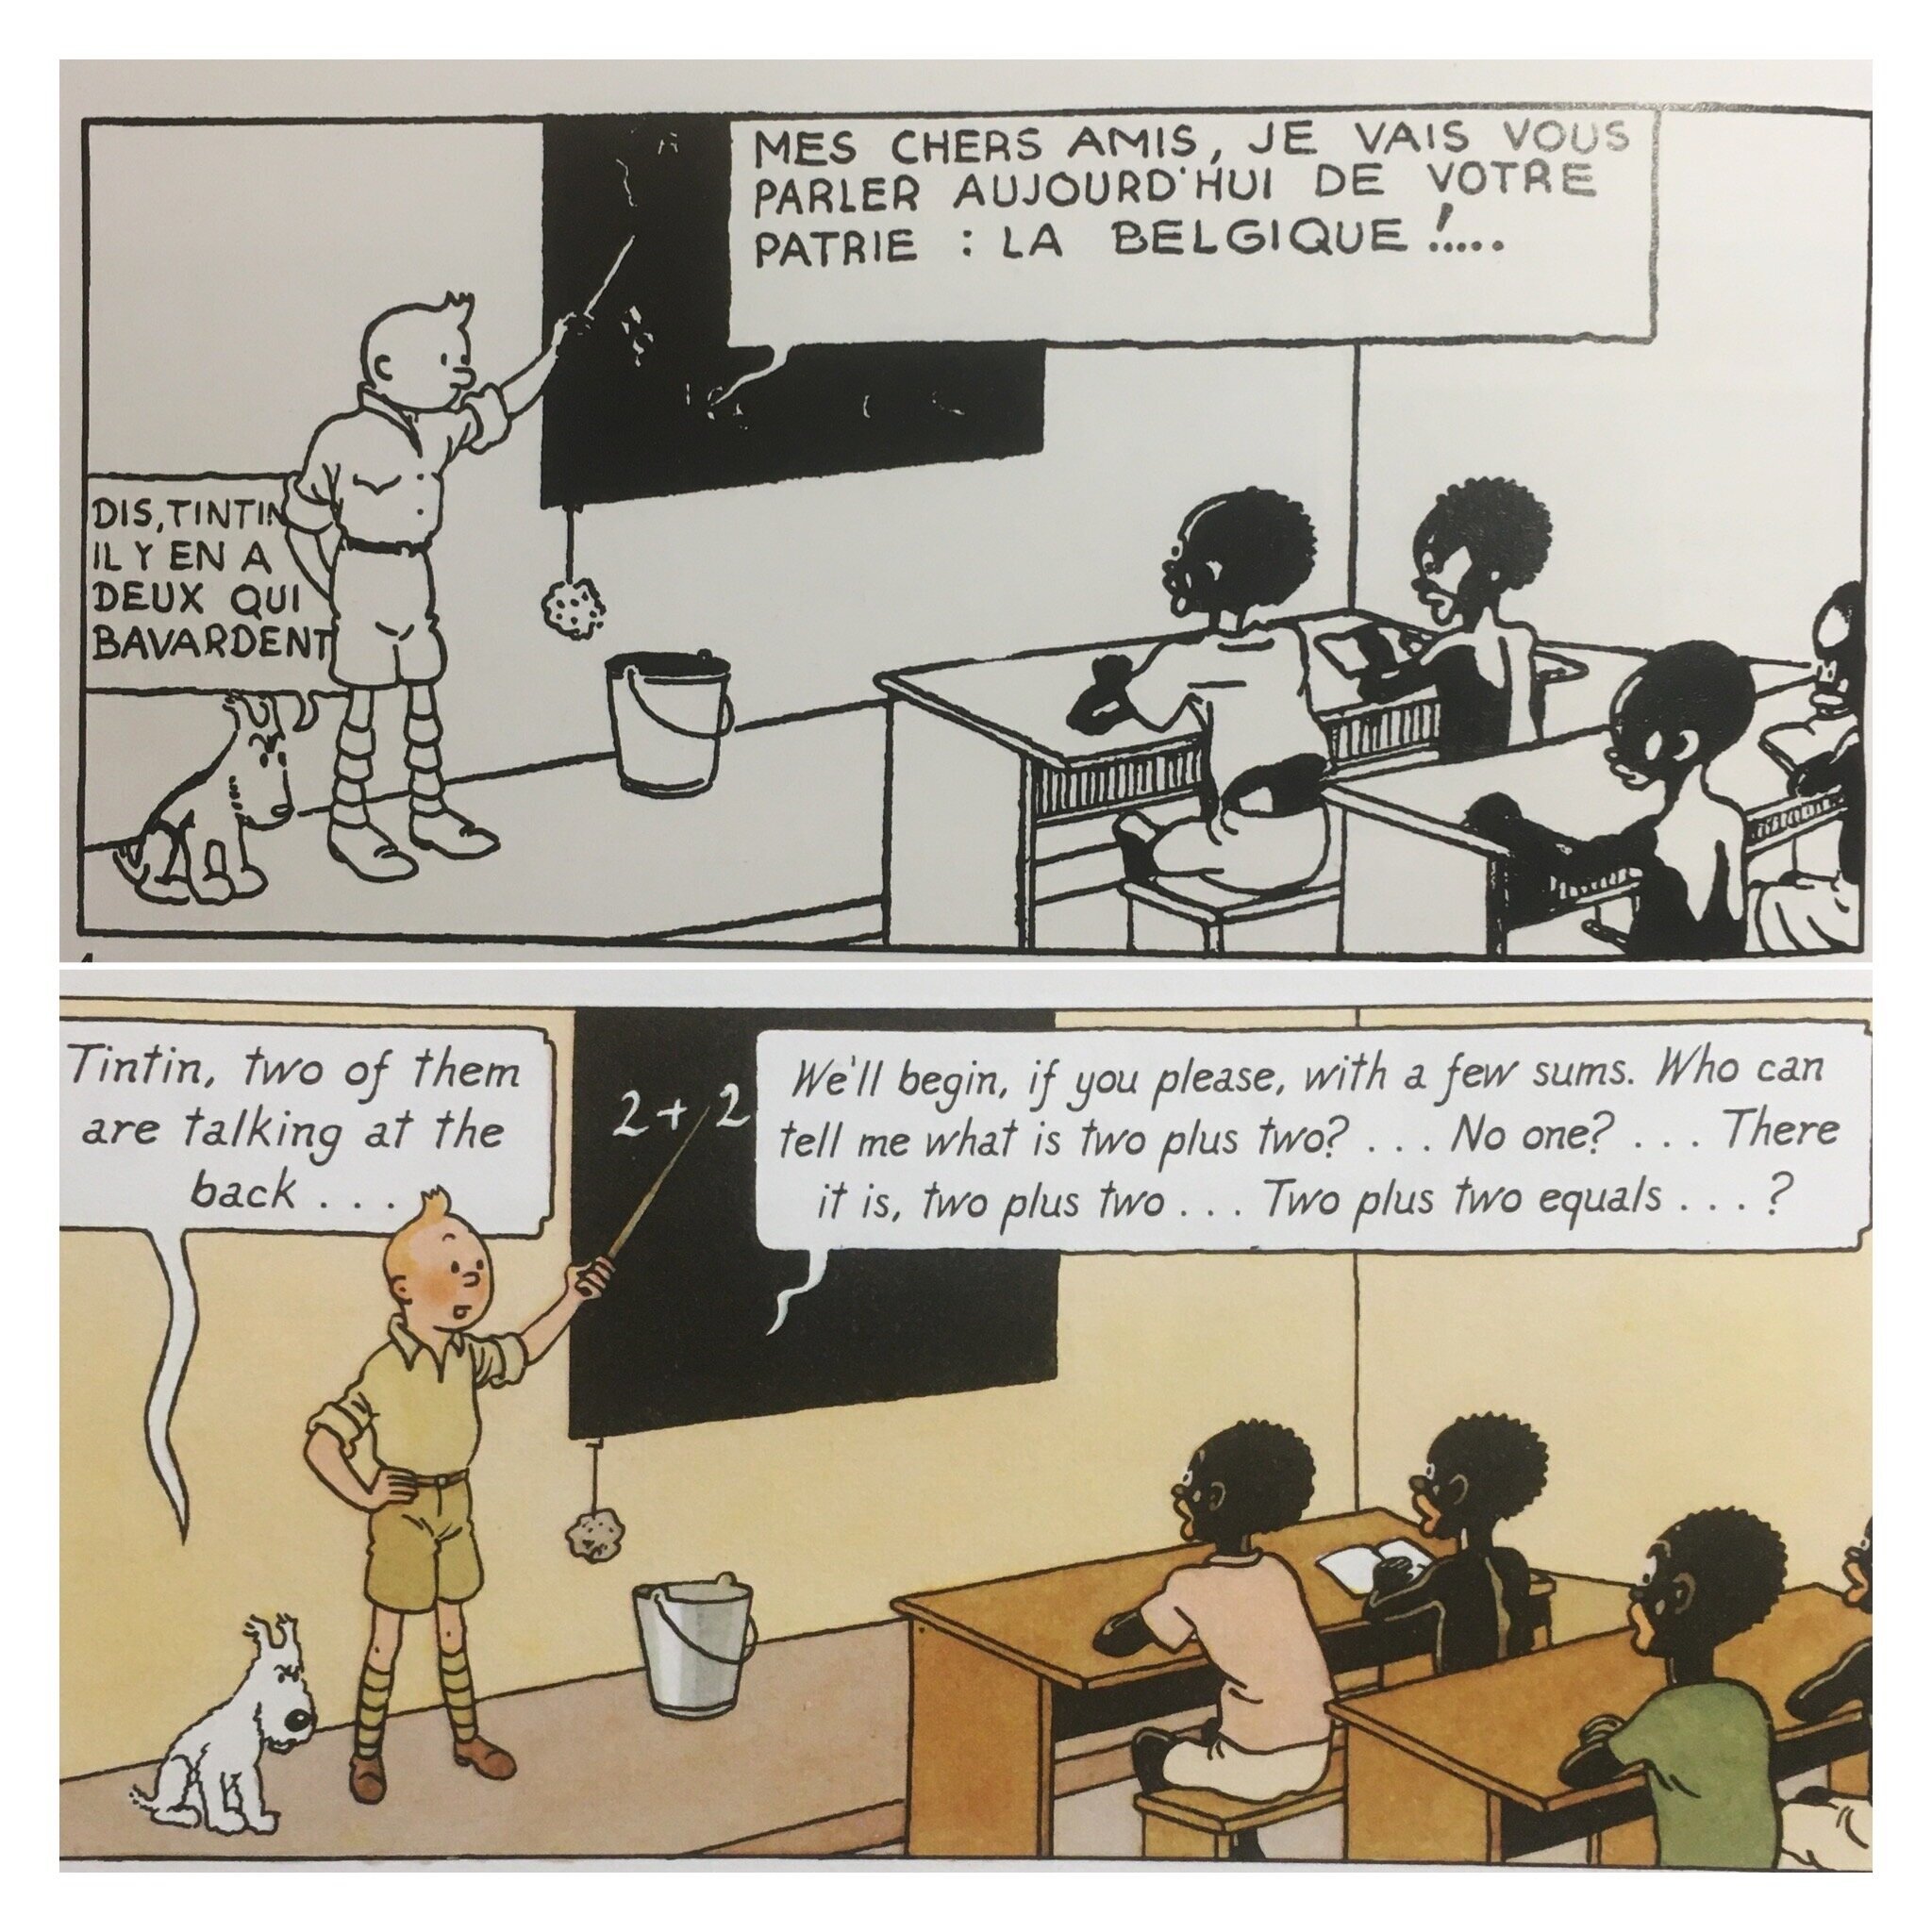  The revised edition replaces Tintin’s lesson on Belgium with one on mathematics. Snowy remains a snitch in both versions 